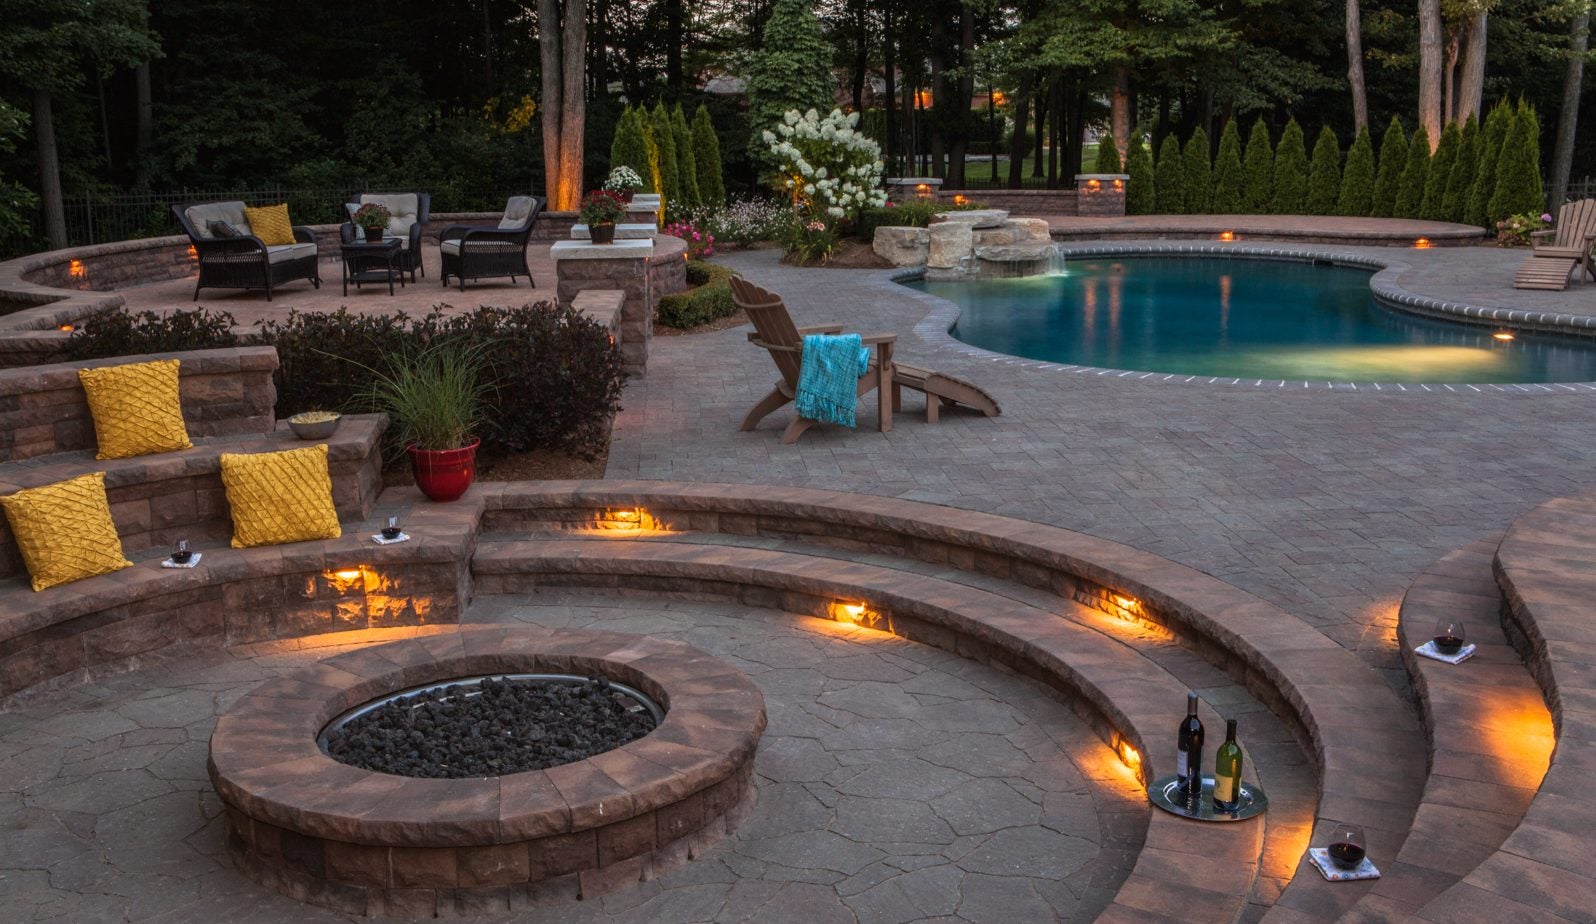 Pool and Fire Pit Patio Design Ideas